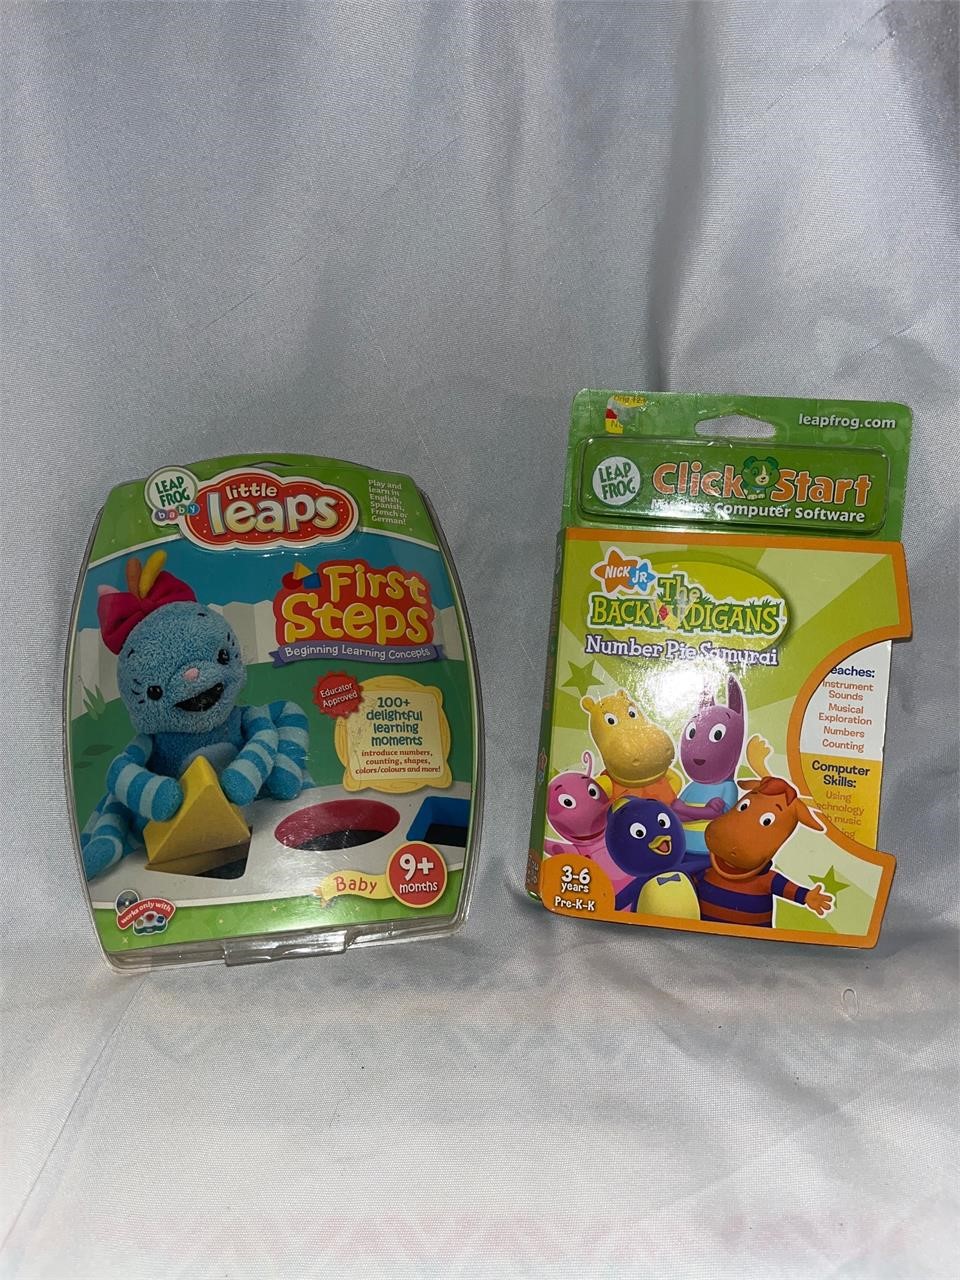 NIB- leap frog games fro children’s learning